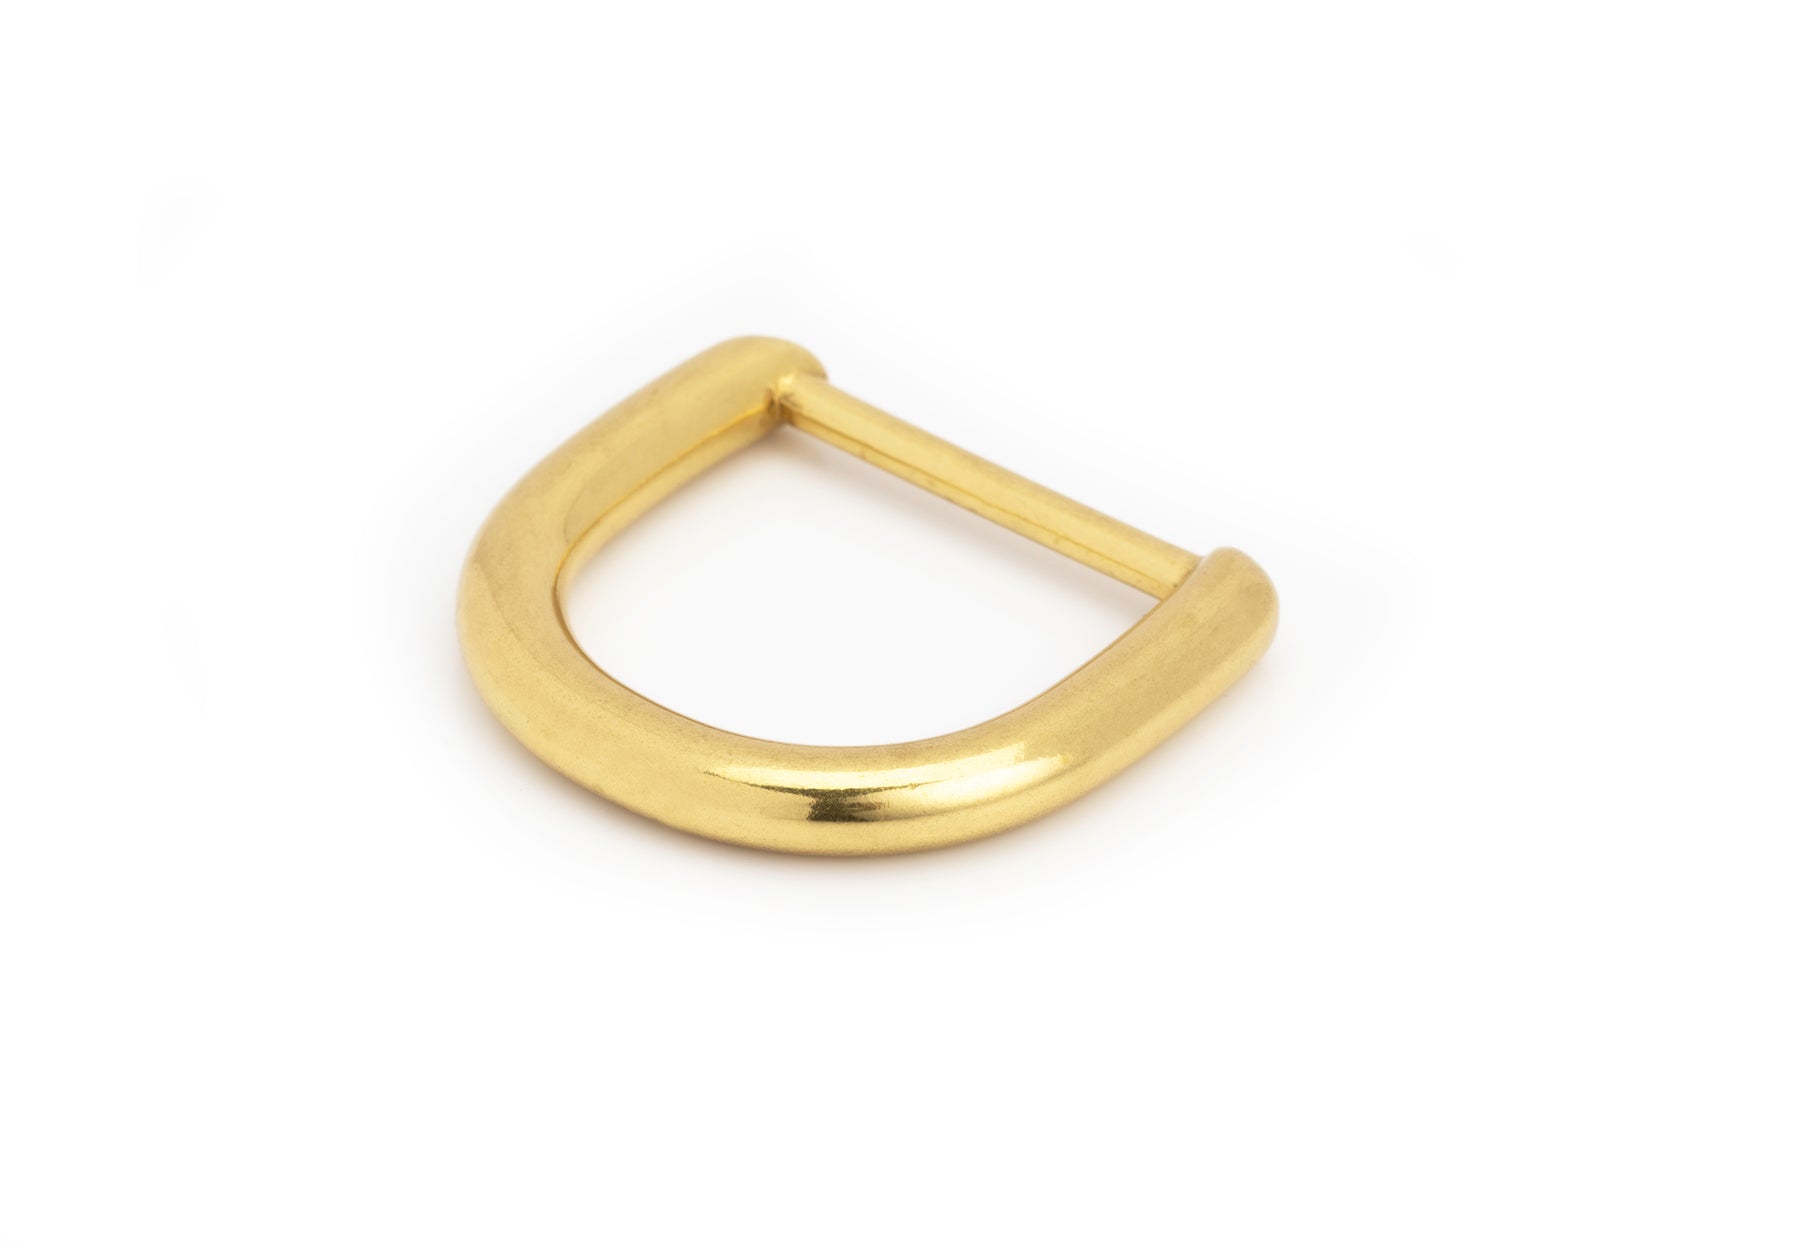 Solid Brass D-Rings